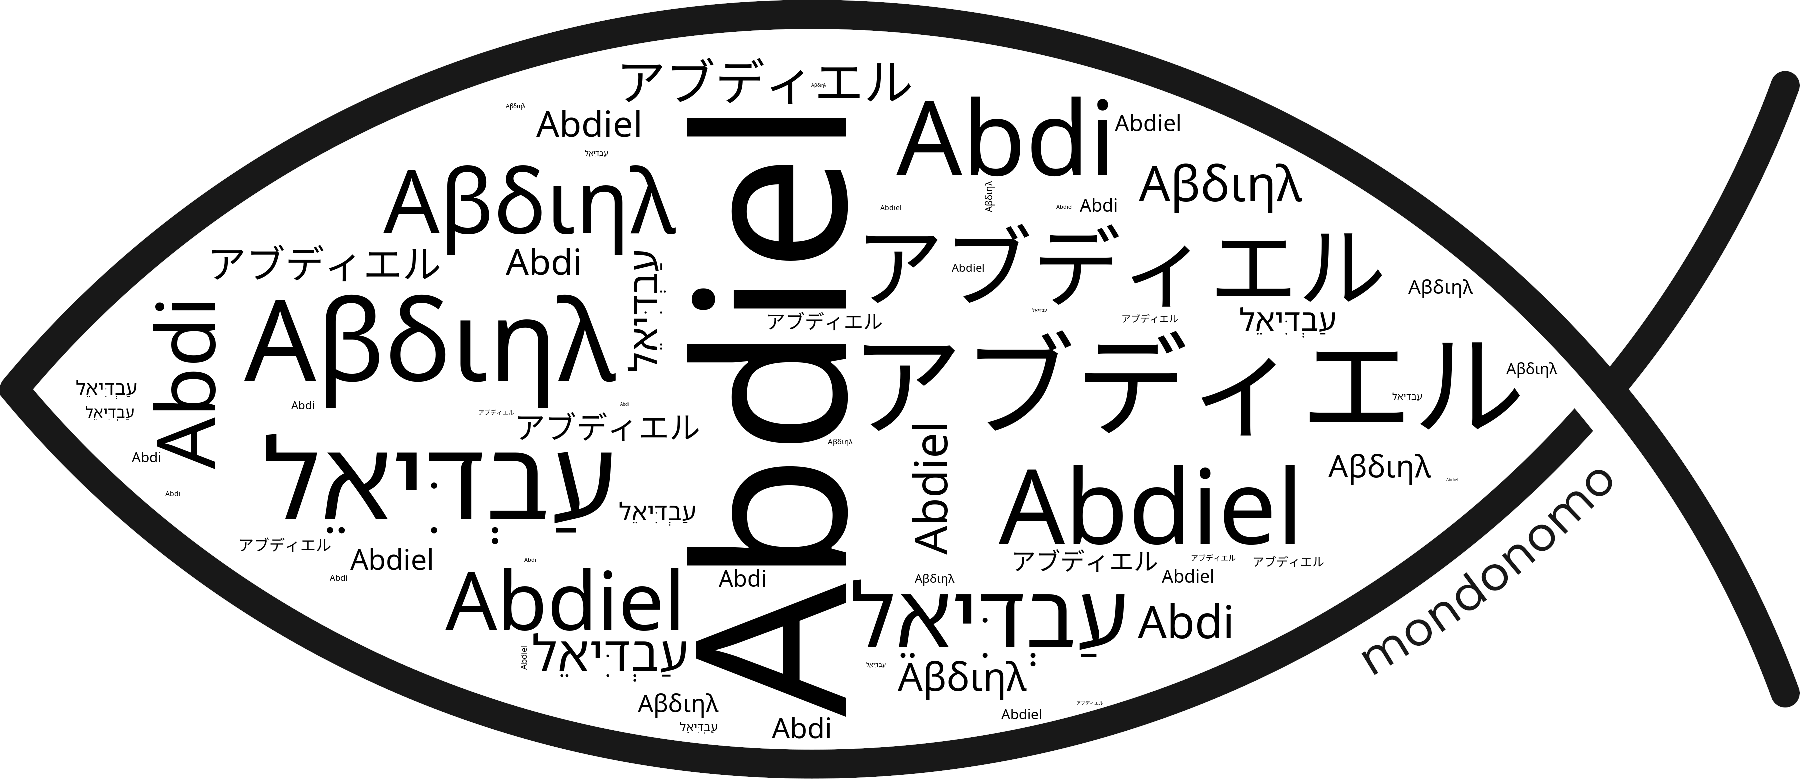 Name Abdiel in the world's Bibles